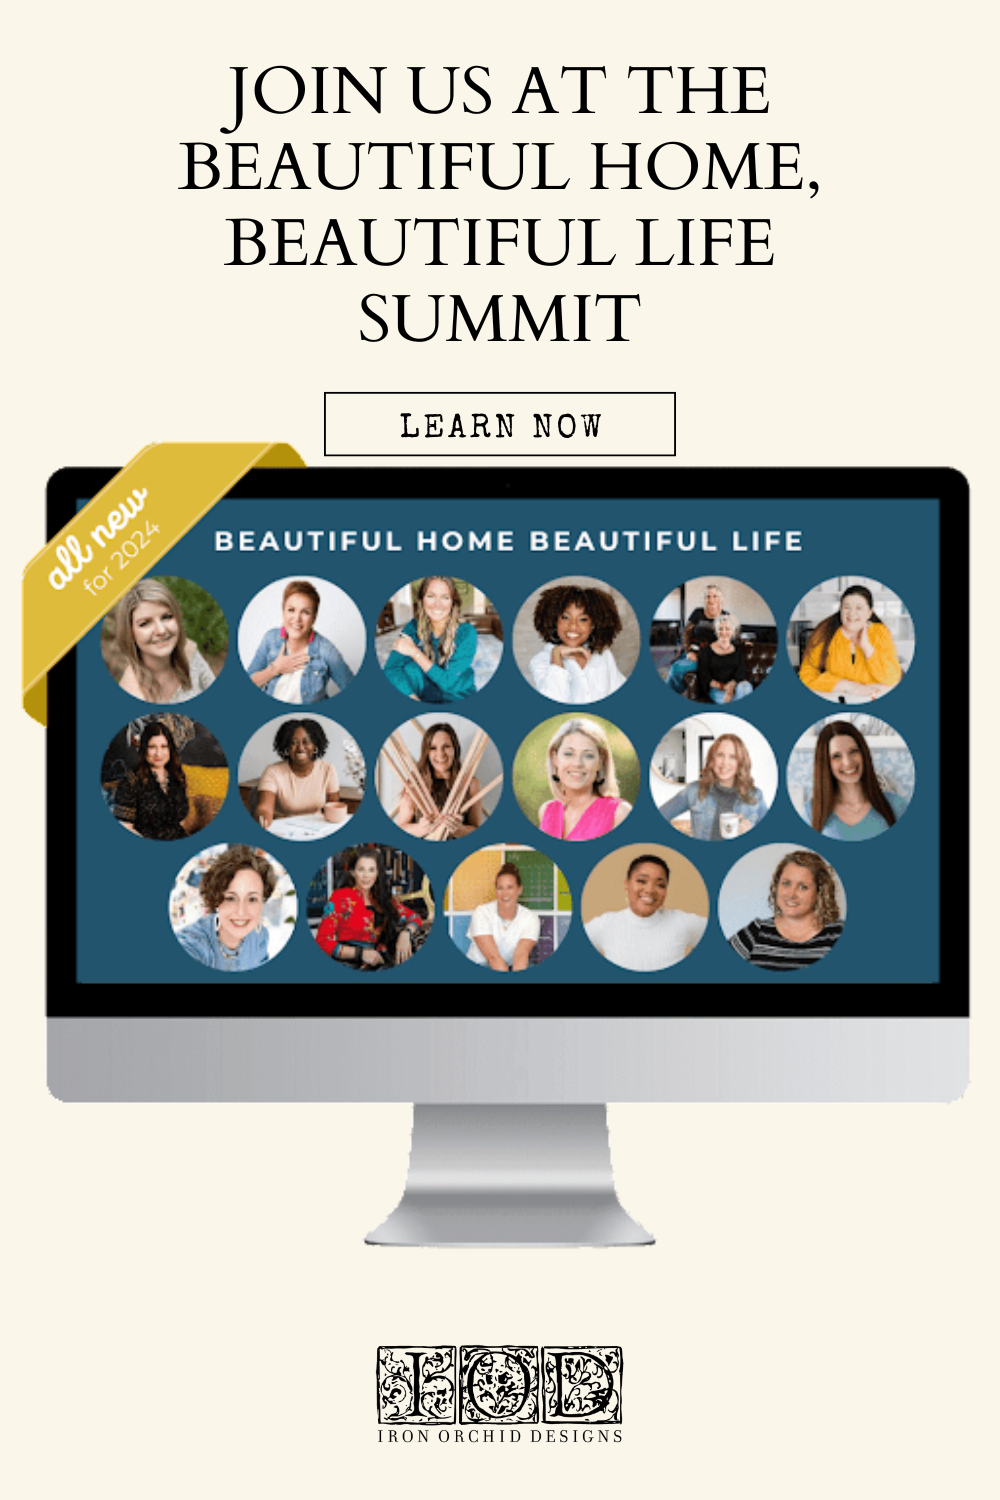 Join us at the Beautiful Home, Beautiful Life Summit